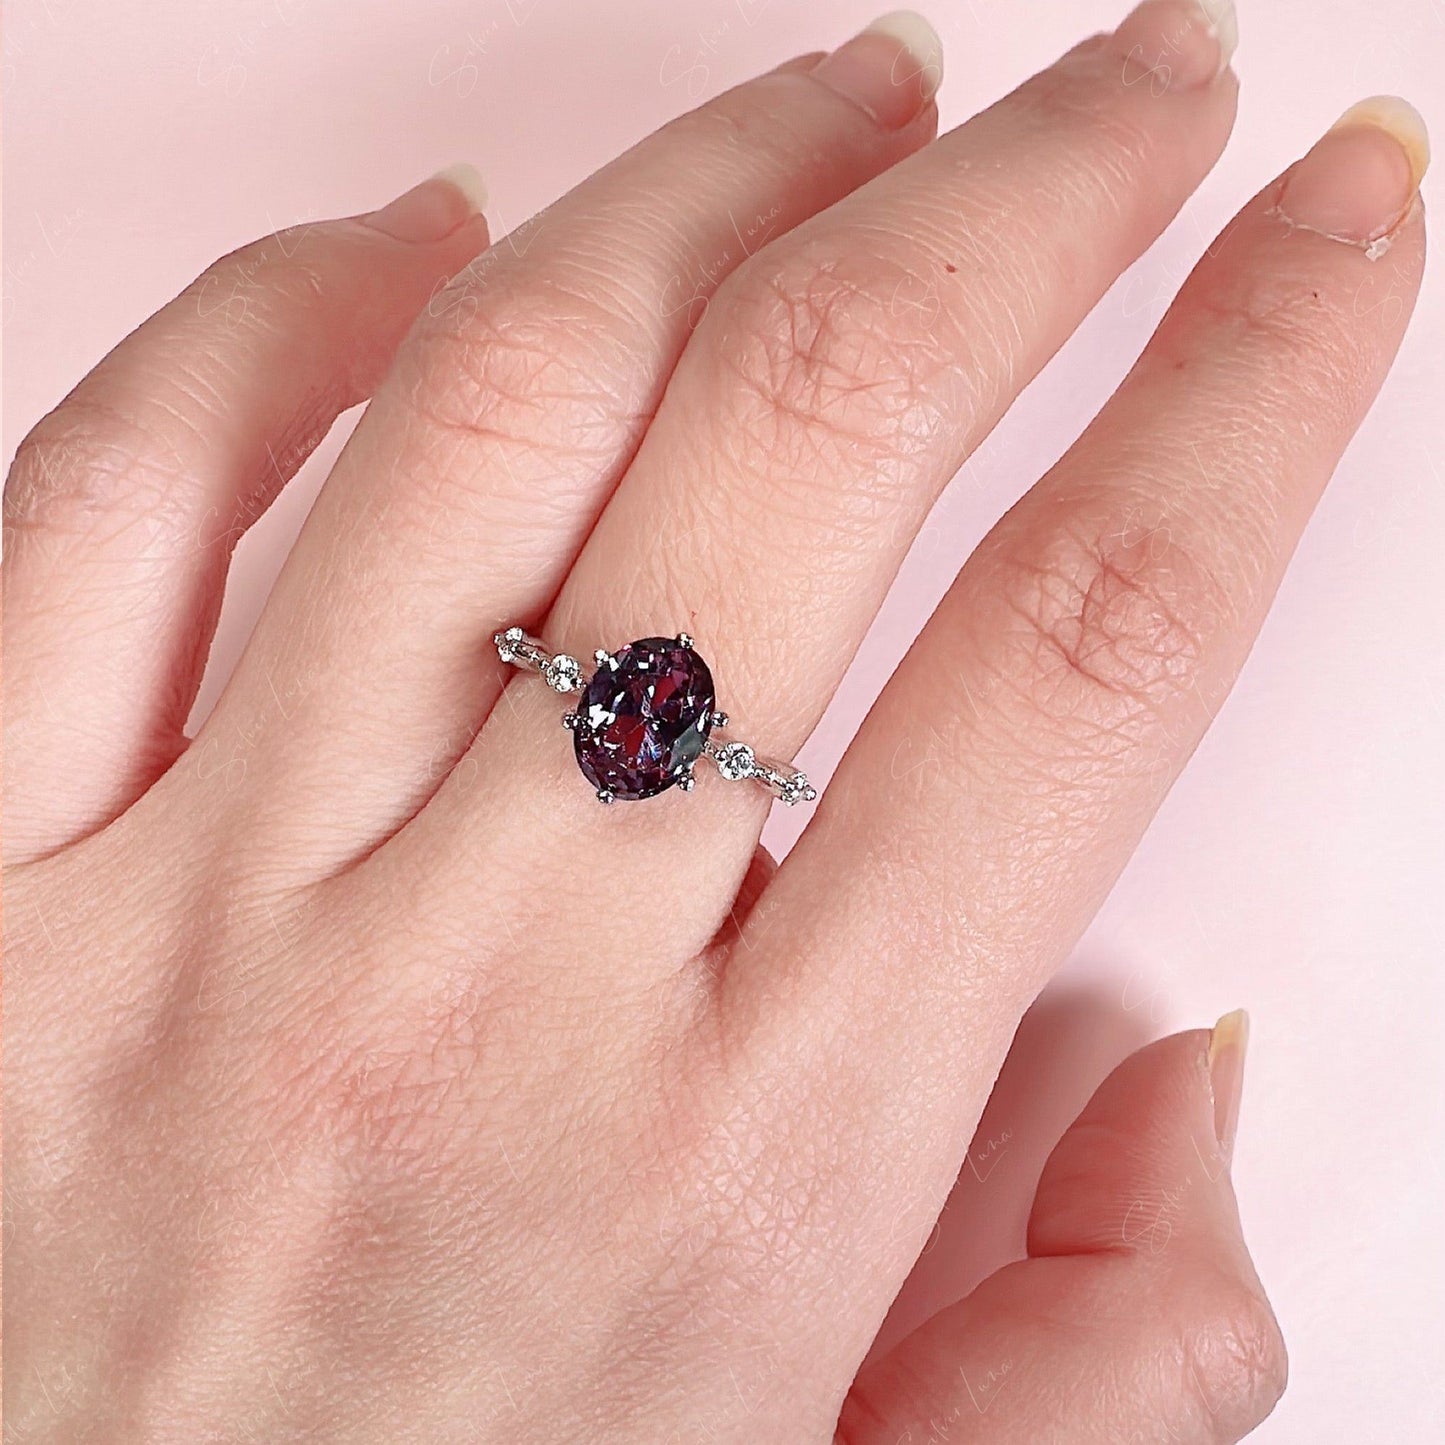 Oval Alexandrite engagement ring